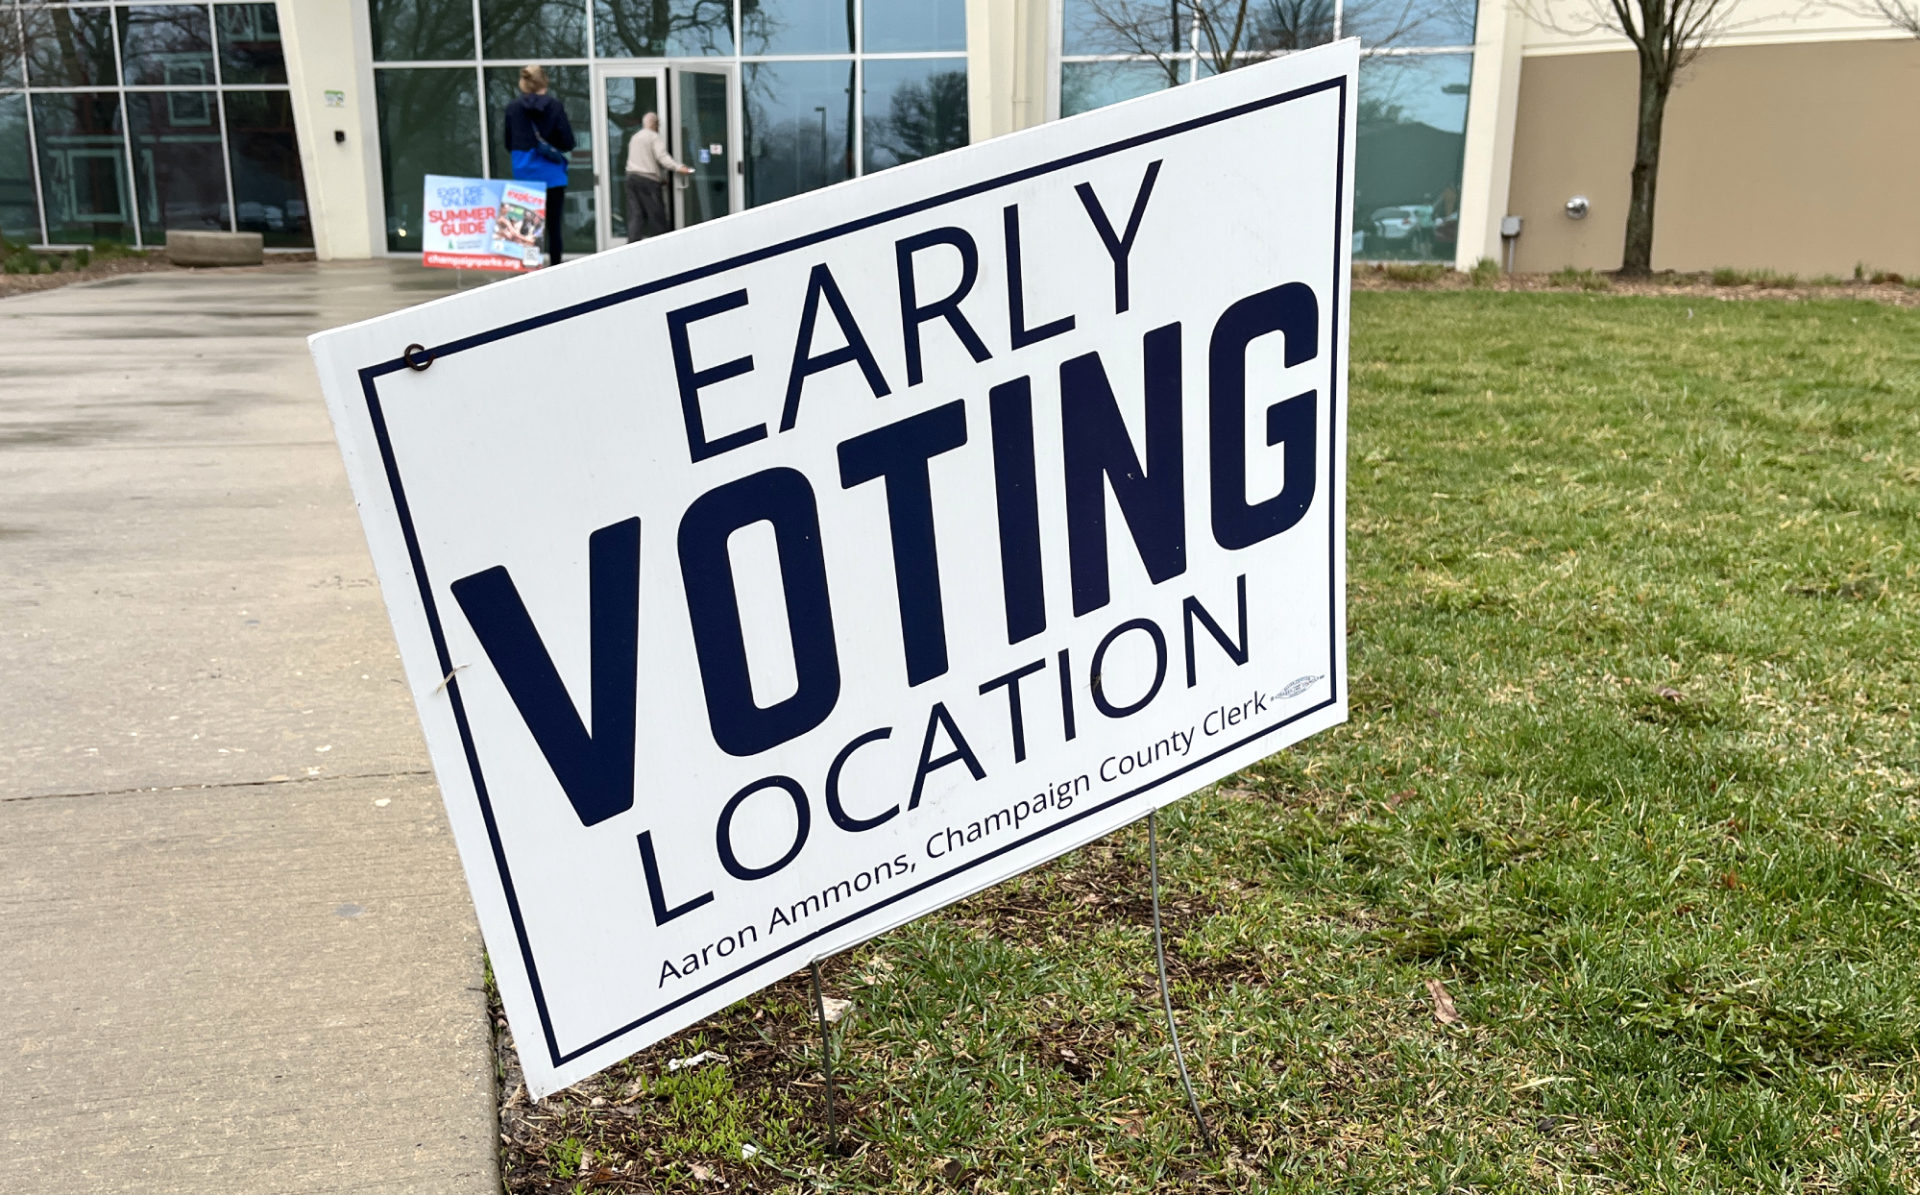 A white yard sign that says "early voting location" in dark blue is in front of the Leonhard Rec Center in Champaign.